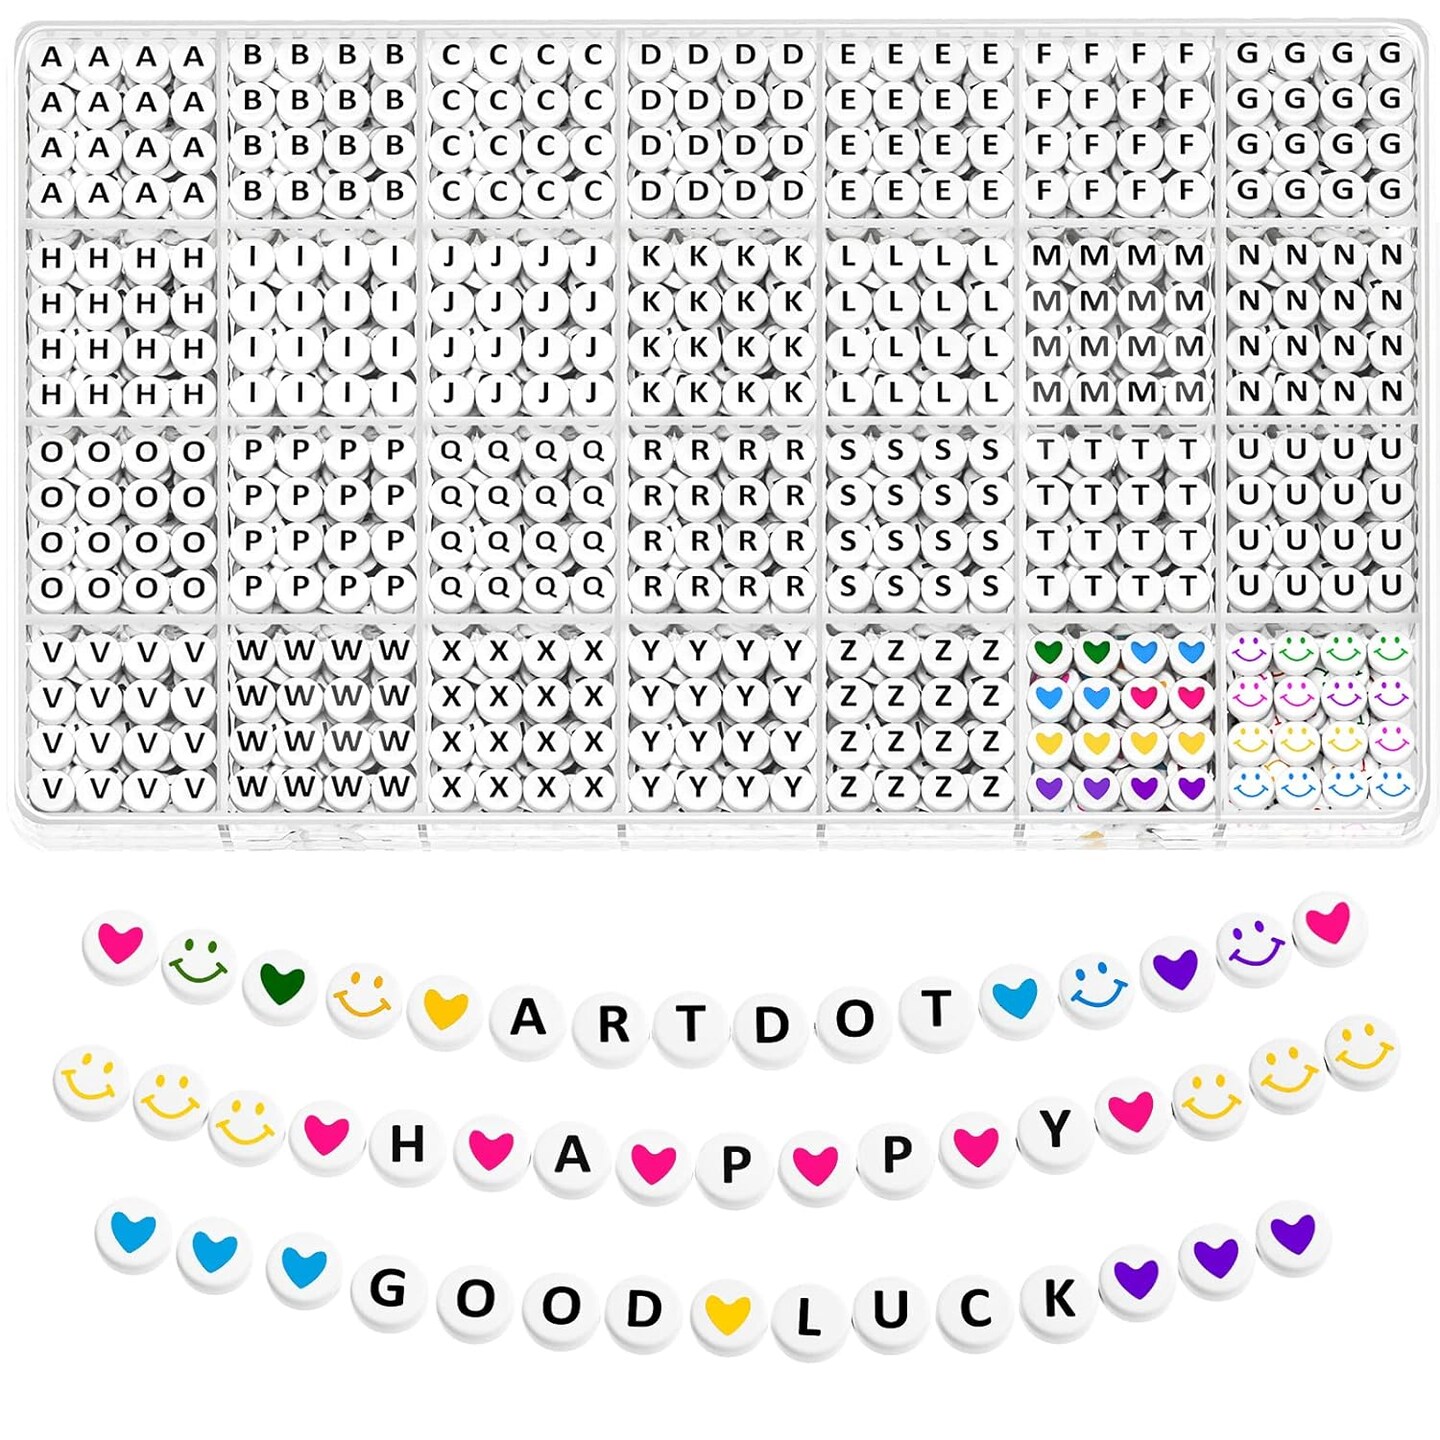 1400 PCS Letter Beads, 28 Styles Friendship Bracelets Assorted Alphabet Beads Preppy Beads Jewelry Making Kit with Beads Case for Teen Girl Gifts Ages 6 7 8 9 10 11 12